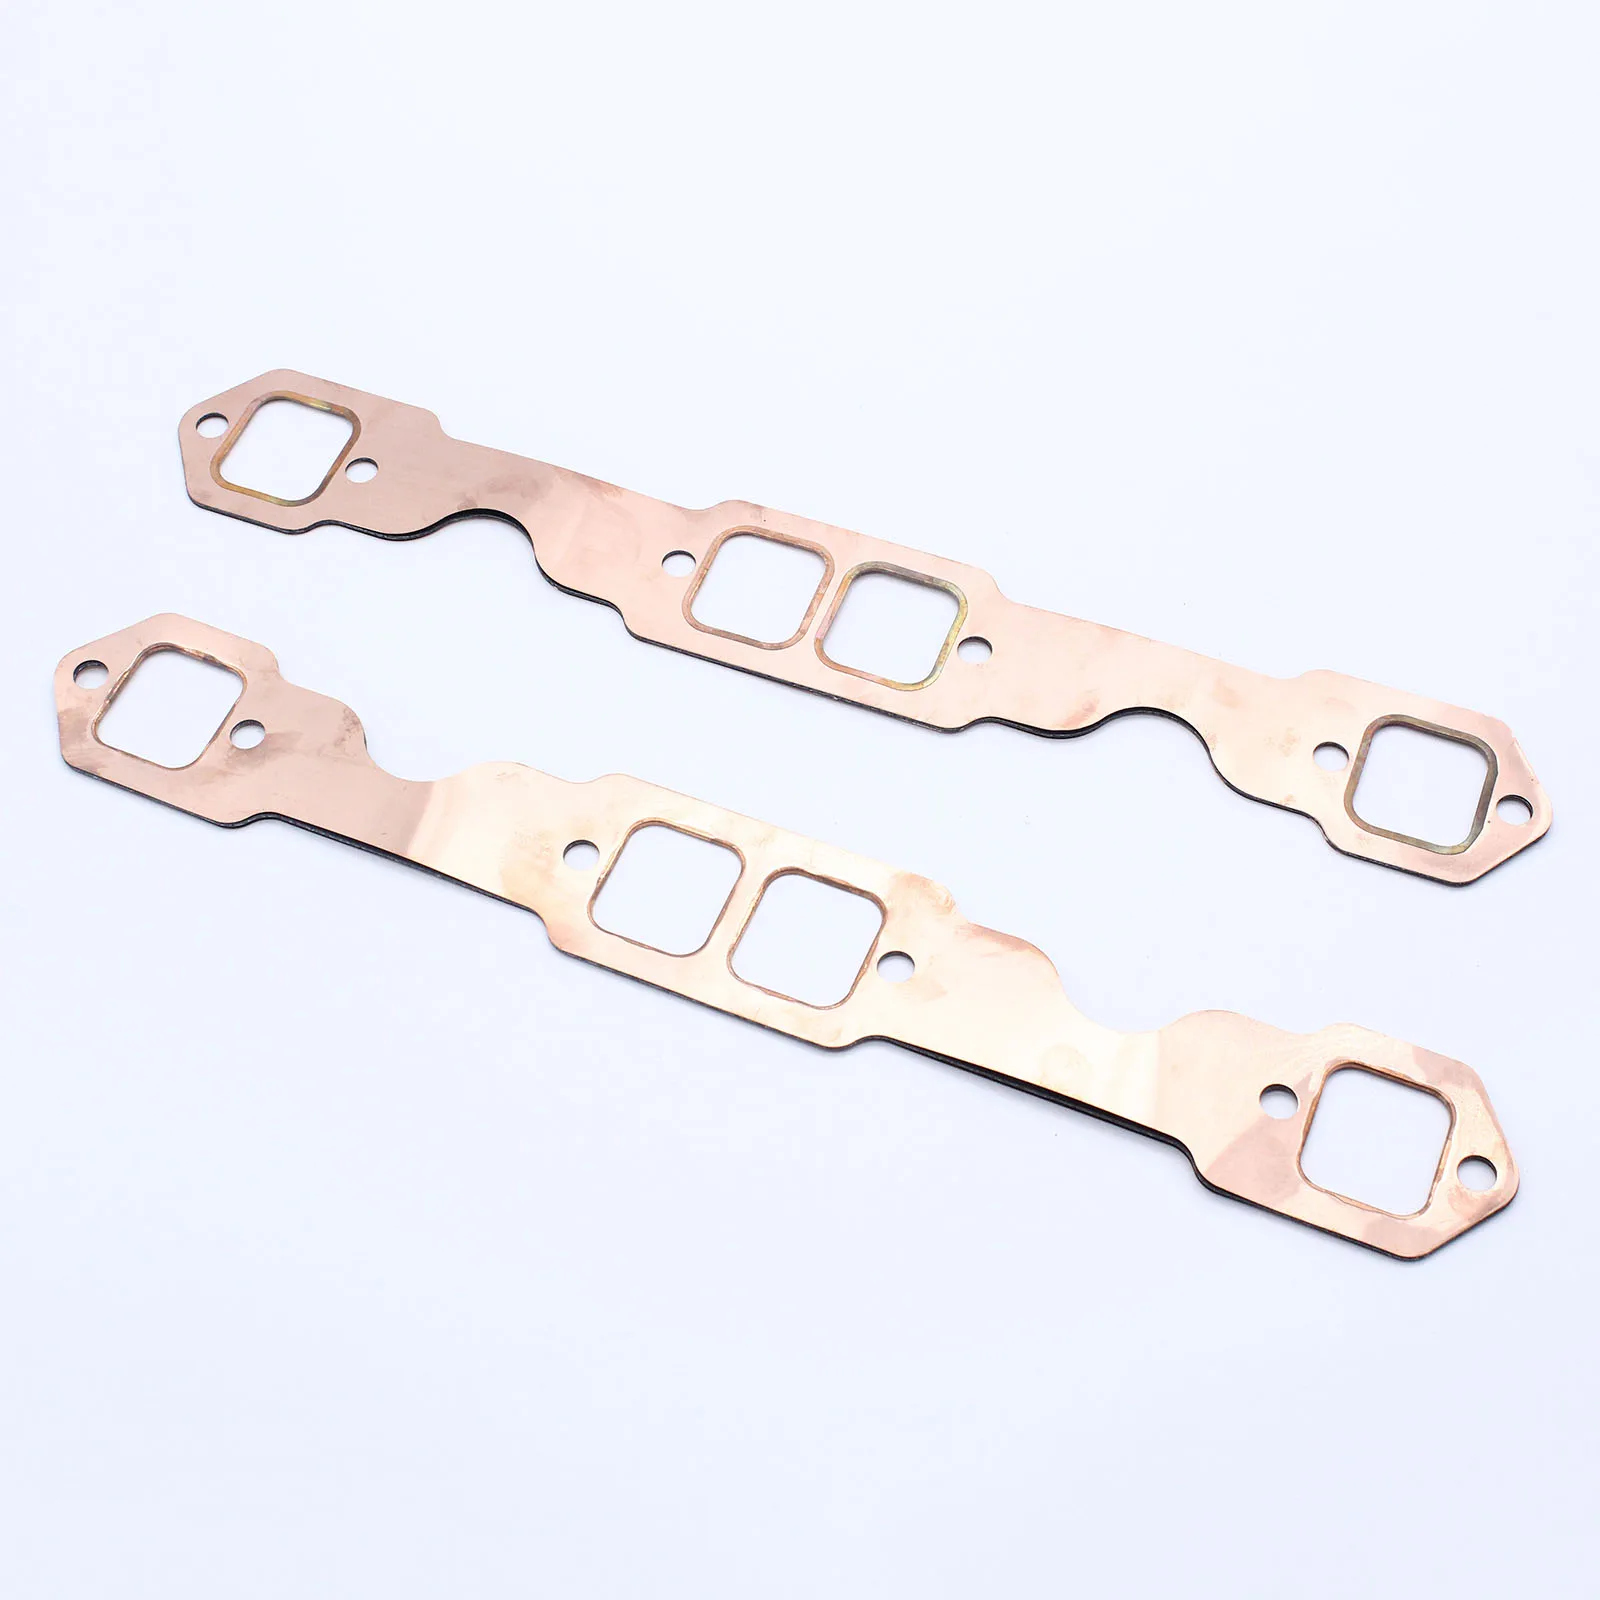 2x SBC Exhaust Gasket Seal for Chevy SB 327 305 350 383 Exhaust Manifold Gasket